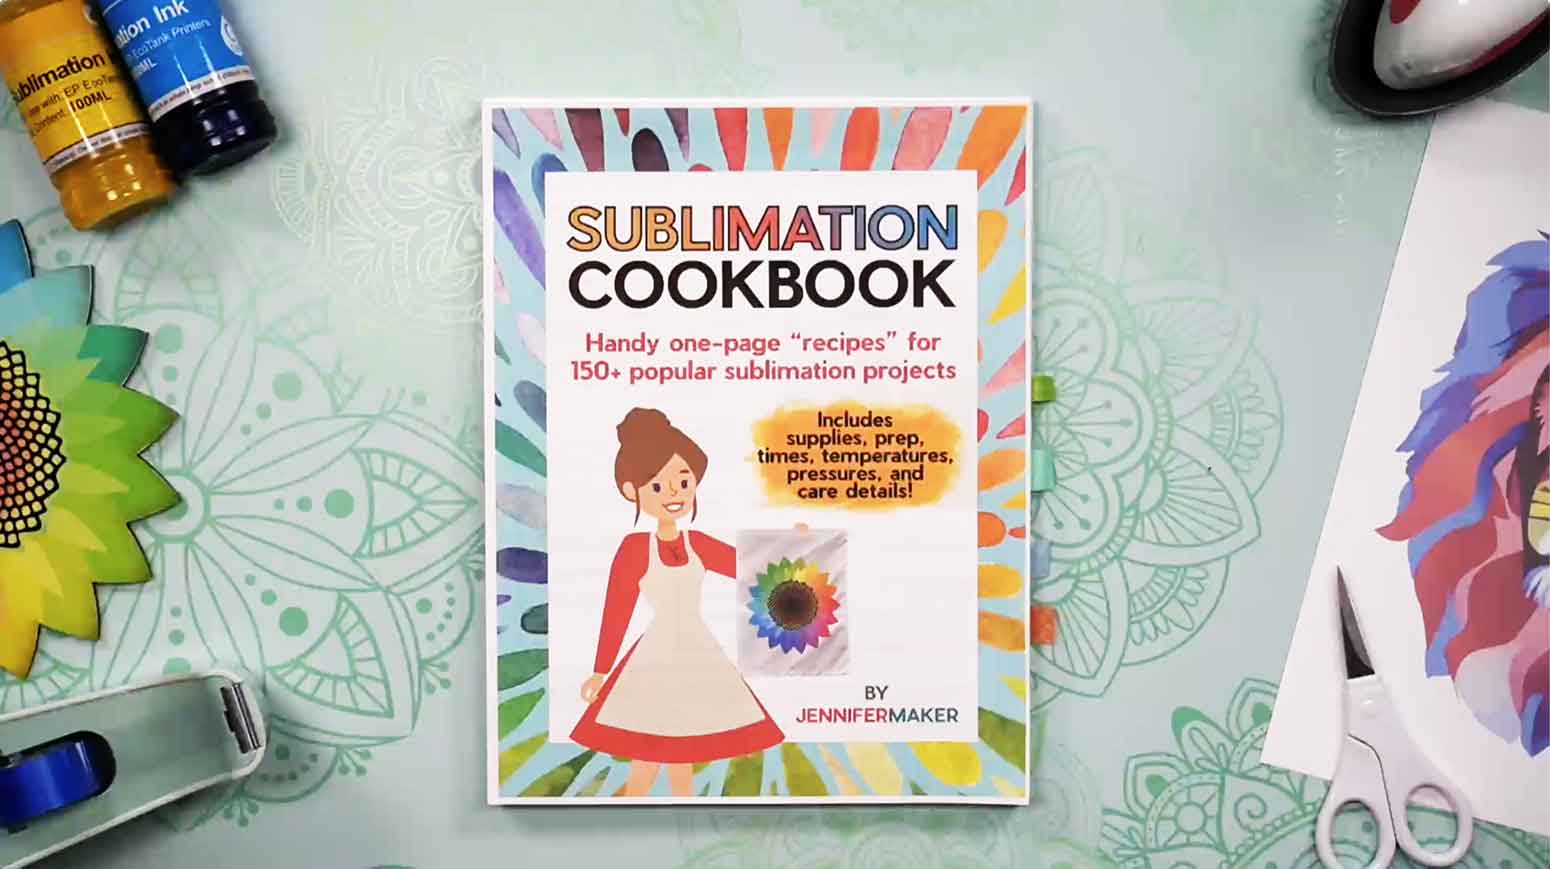 Sublimation Cookbook: Handy recipes for 150+ popular sublimation projects!